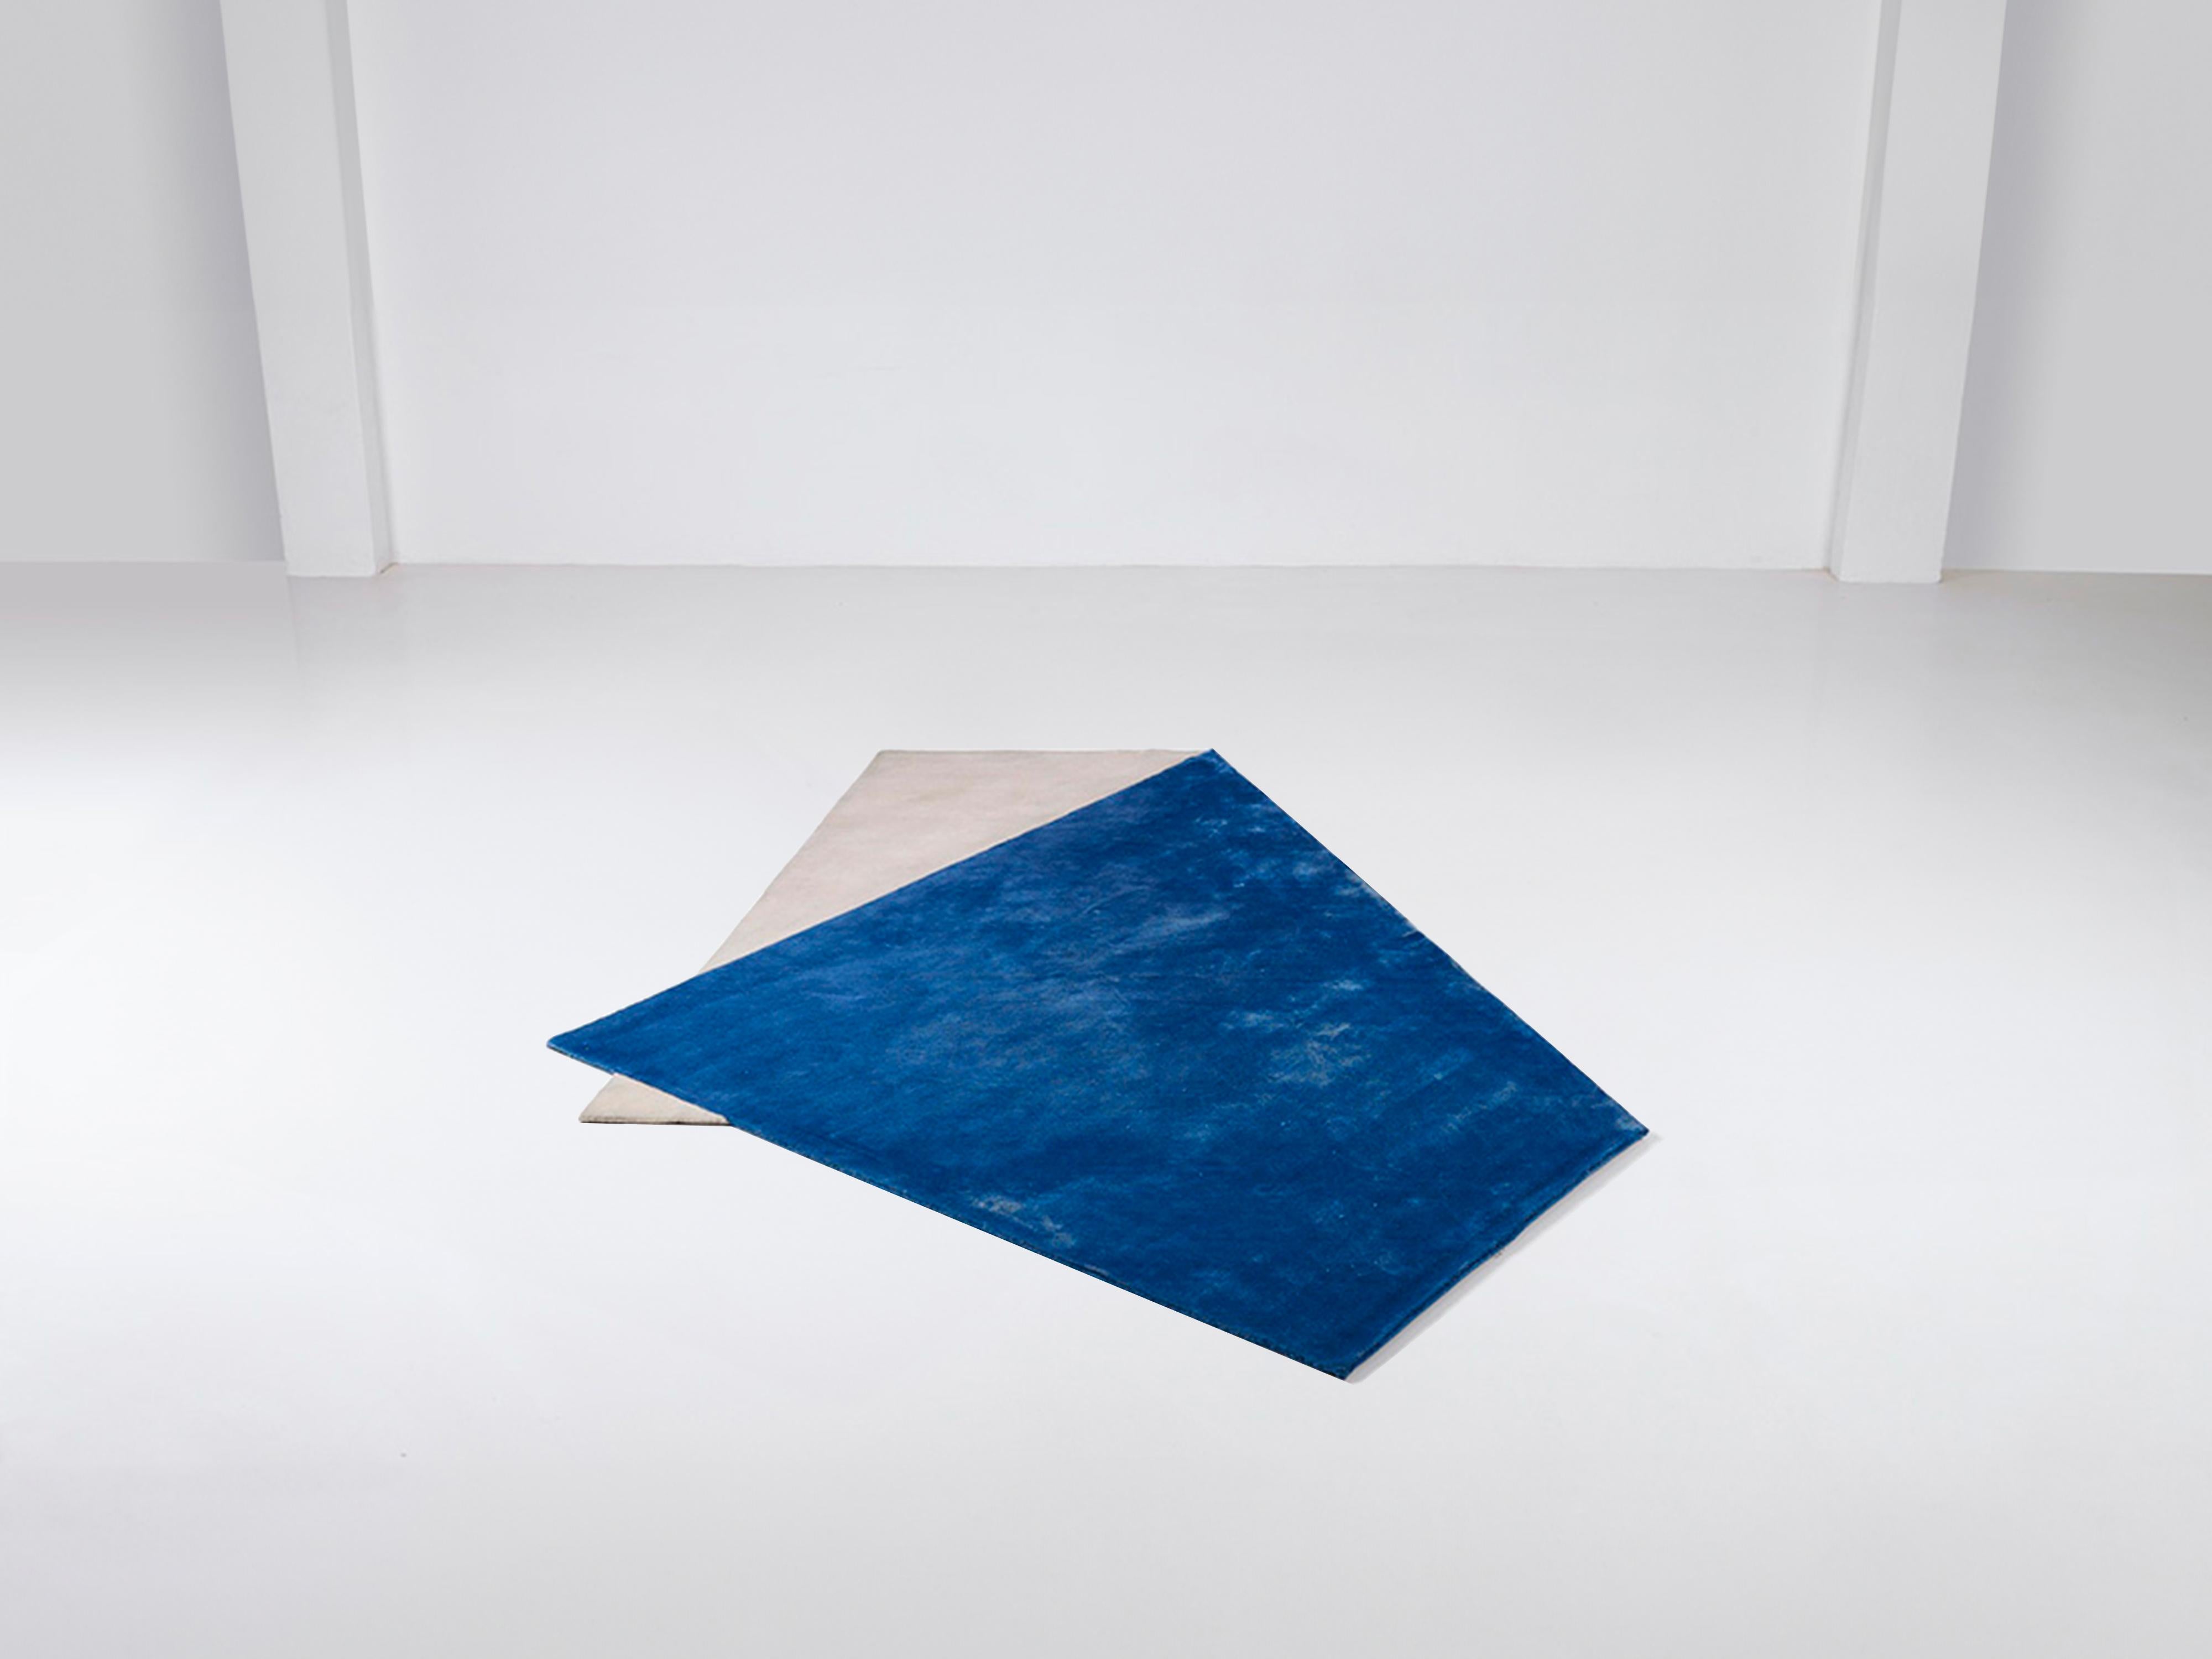 Materials: wool and bamboo silk

Colours: white and blue (also available in black and white)

For Paradisoterrestre Pierre Gonalons designed The Other Side collection inspired by the pleat, the reverse of things, the verso which is usually hidden, a